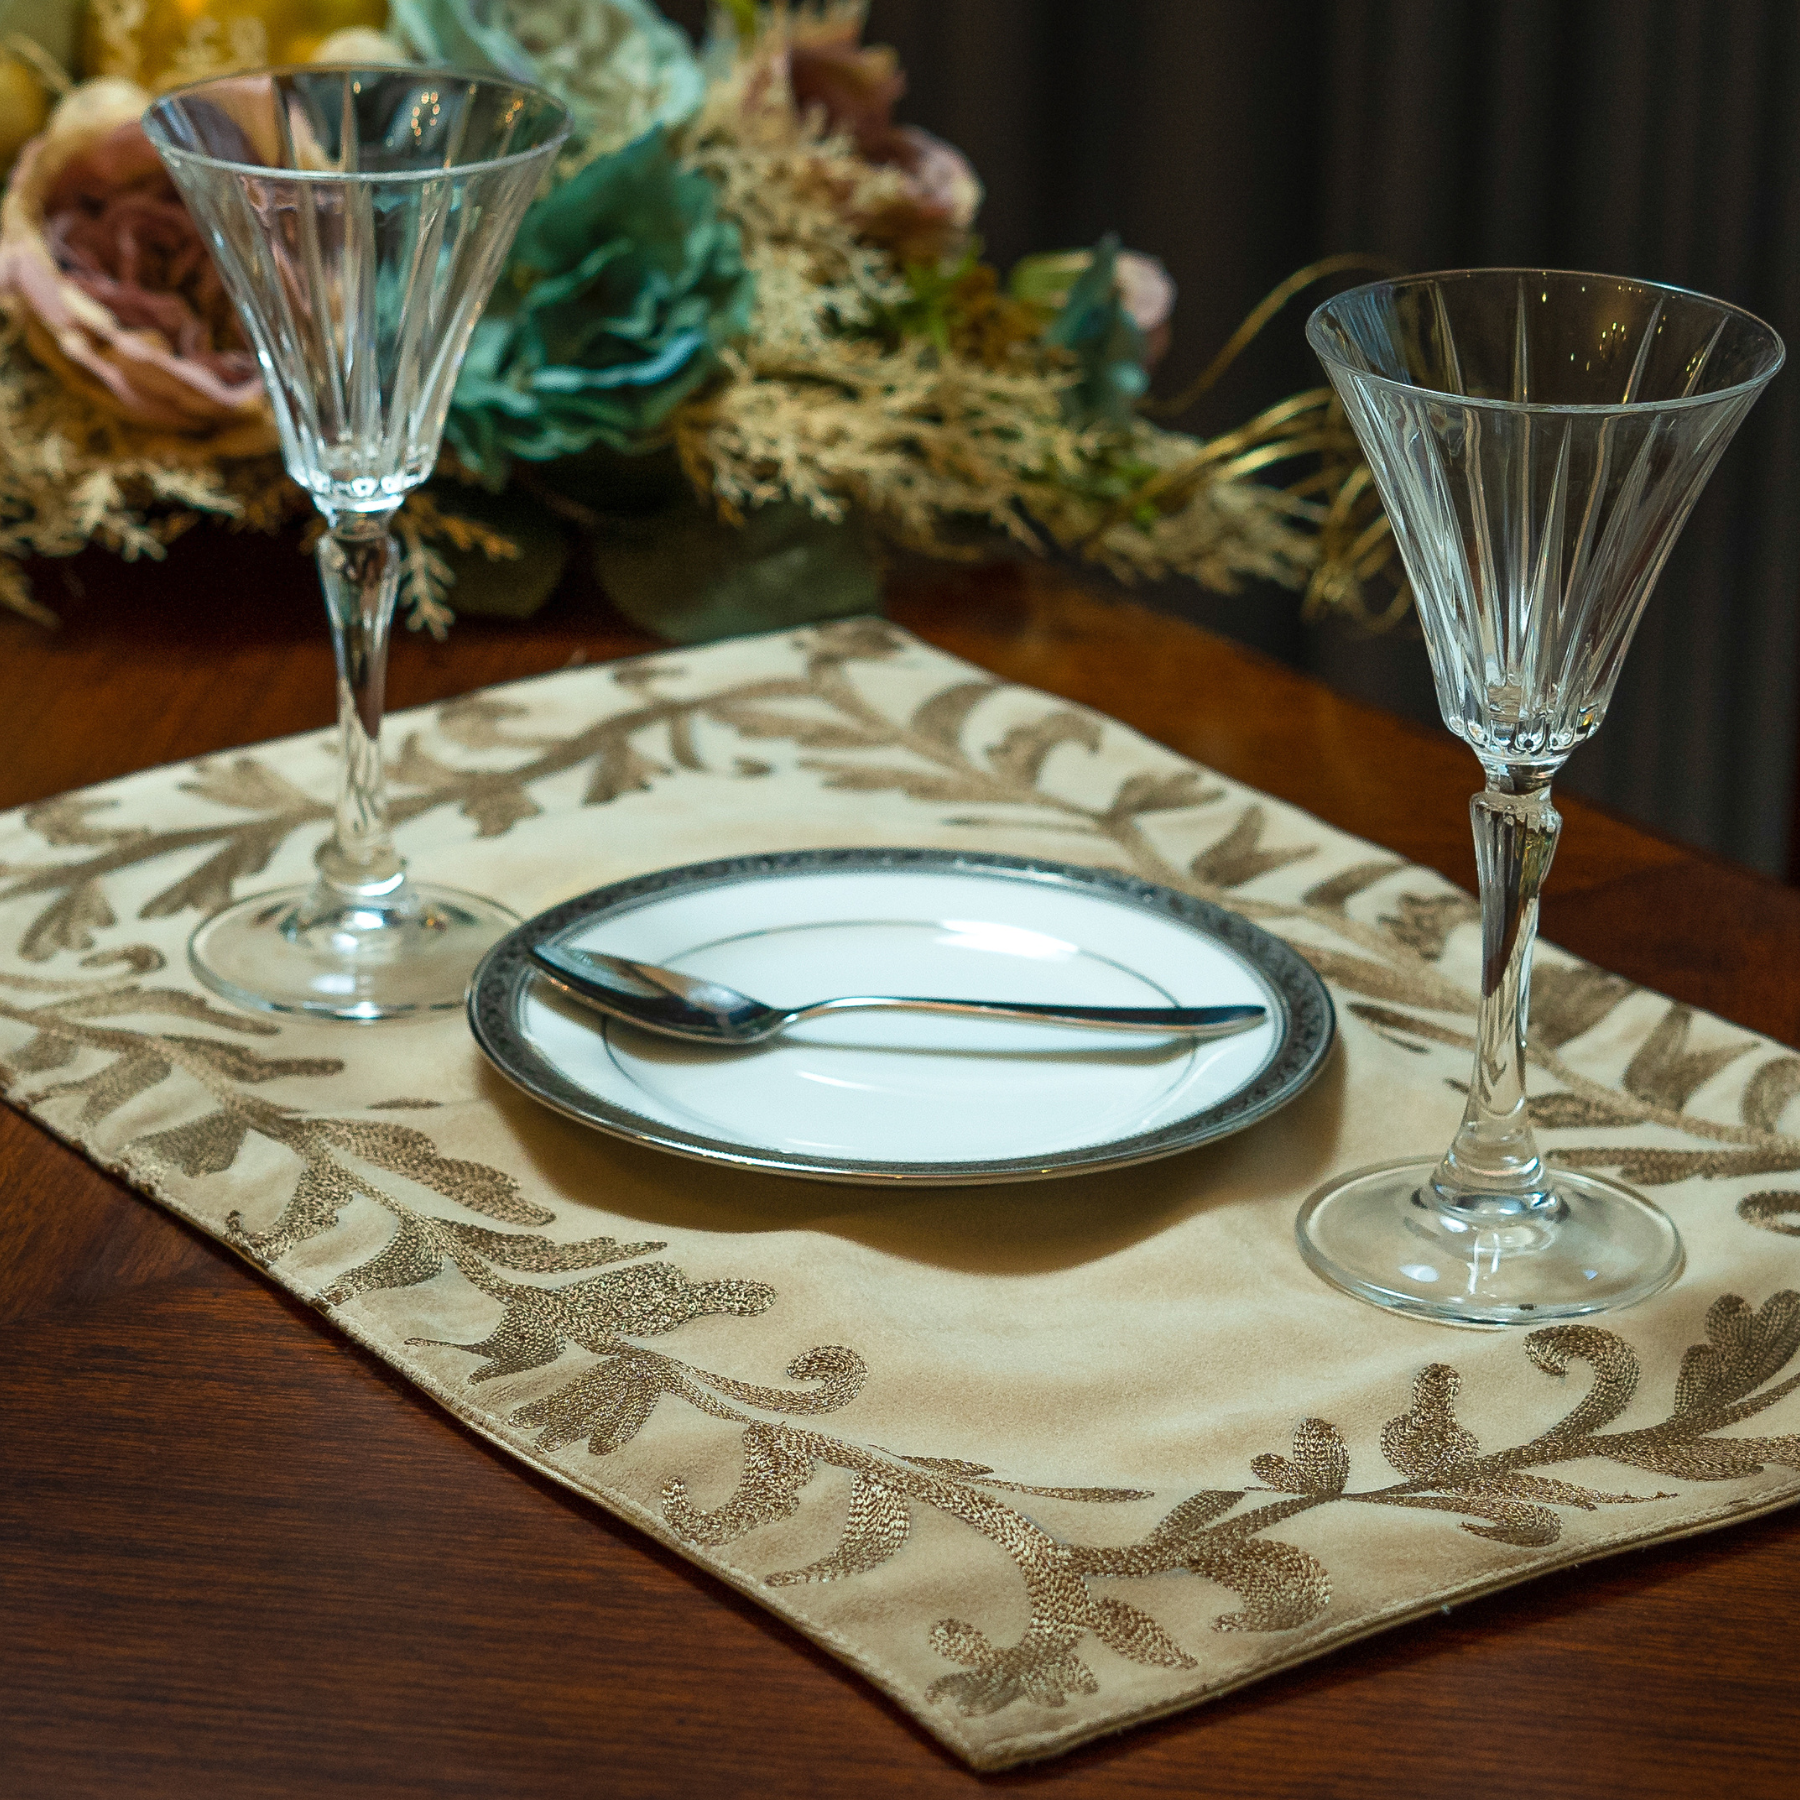 The Luxelife Embroidered Placemats